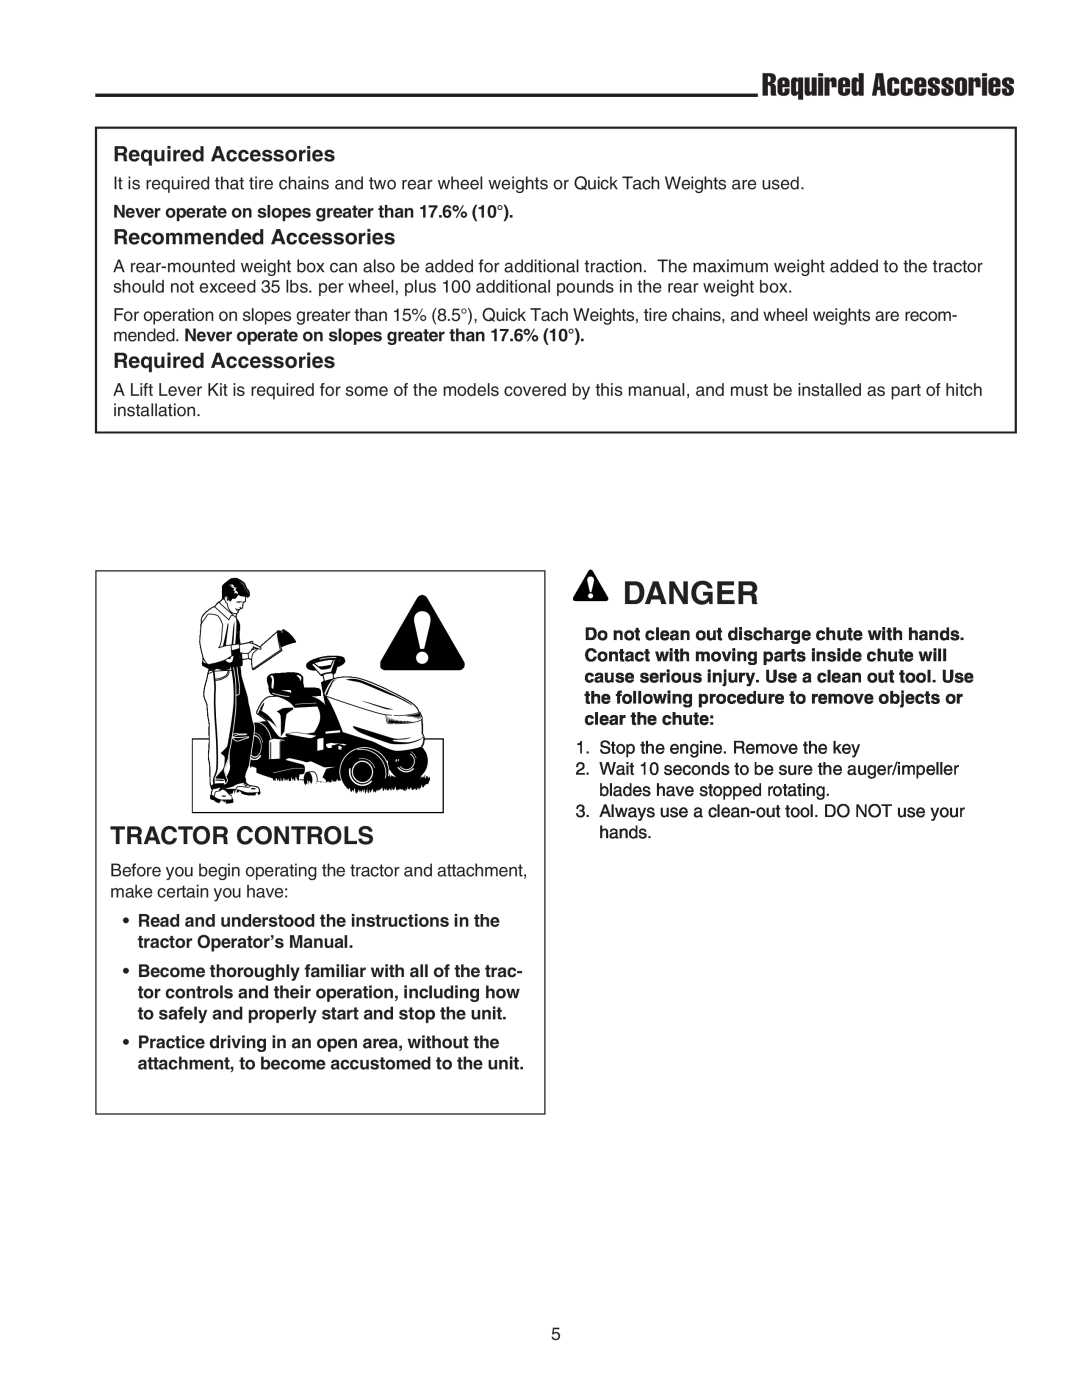 Snapper 42" Single-Stage Snowthrower manual Required Accessories, Danger, Tractor Controls, Recommended Accessories 